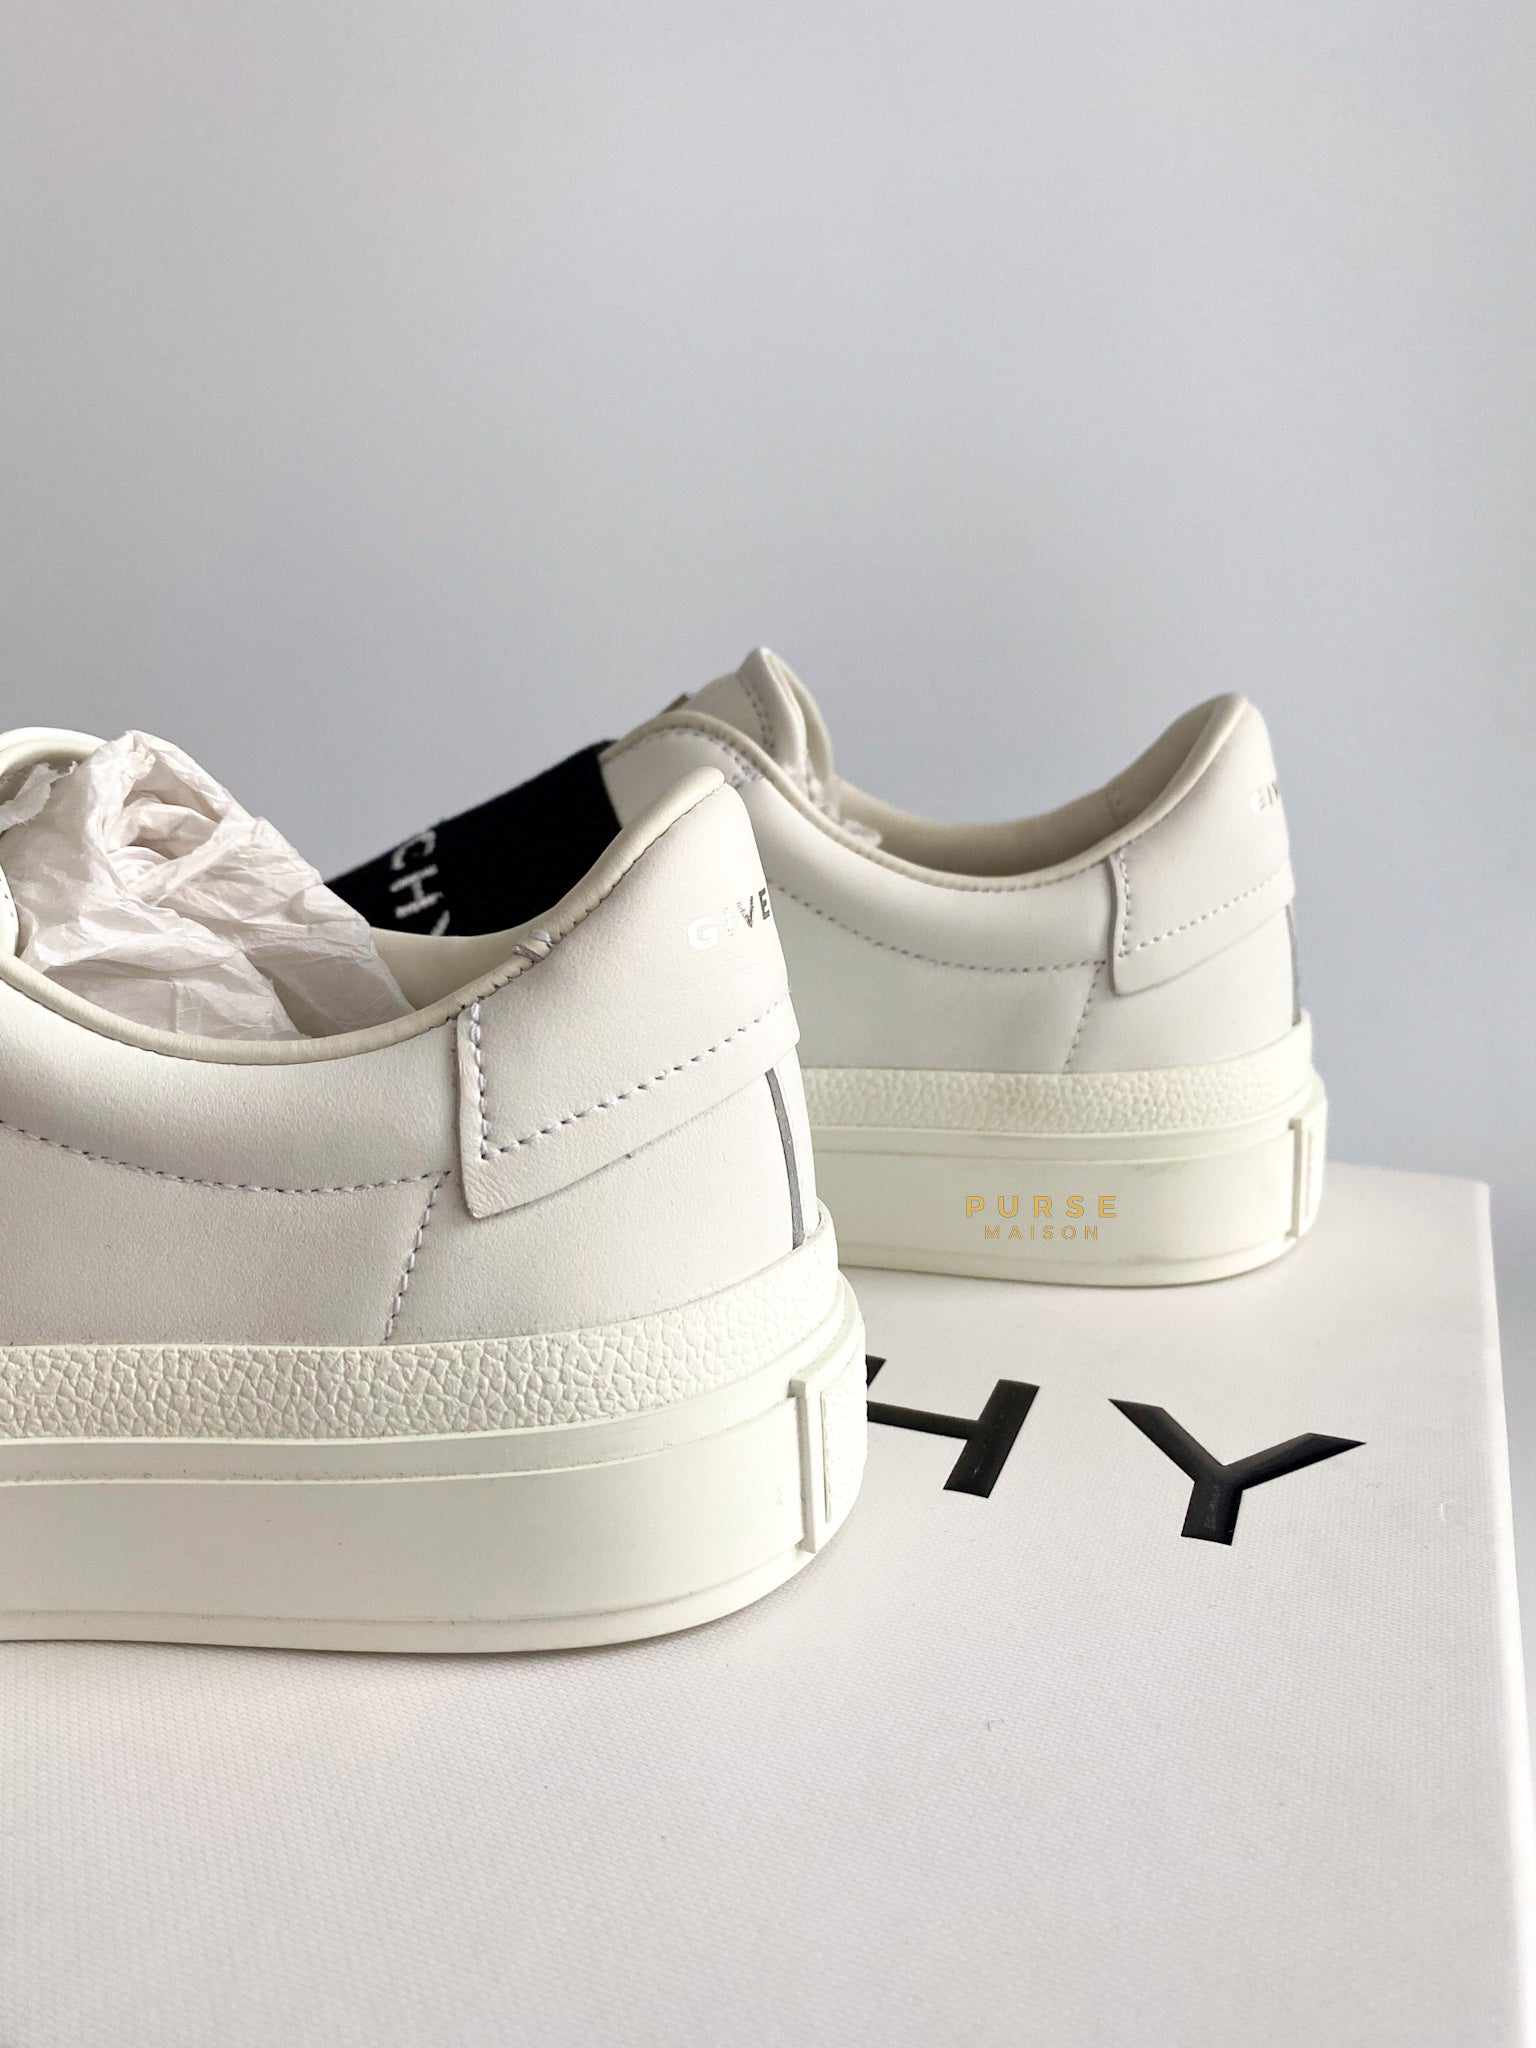 Givenchy Elastic City Court Sneaker in White & Black (Size 35 EUR)